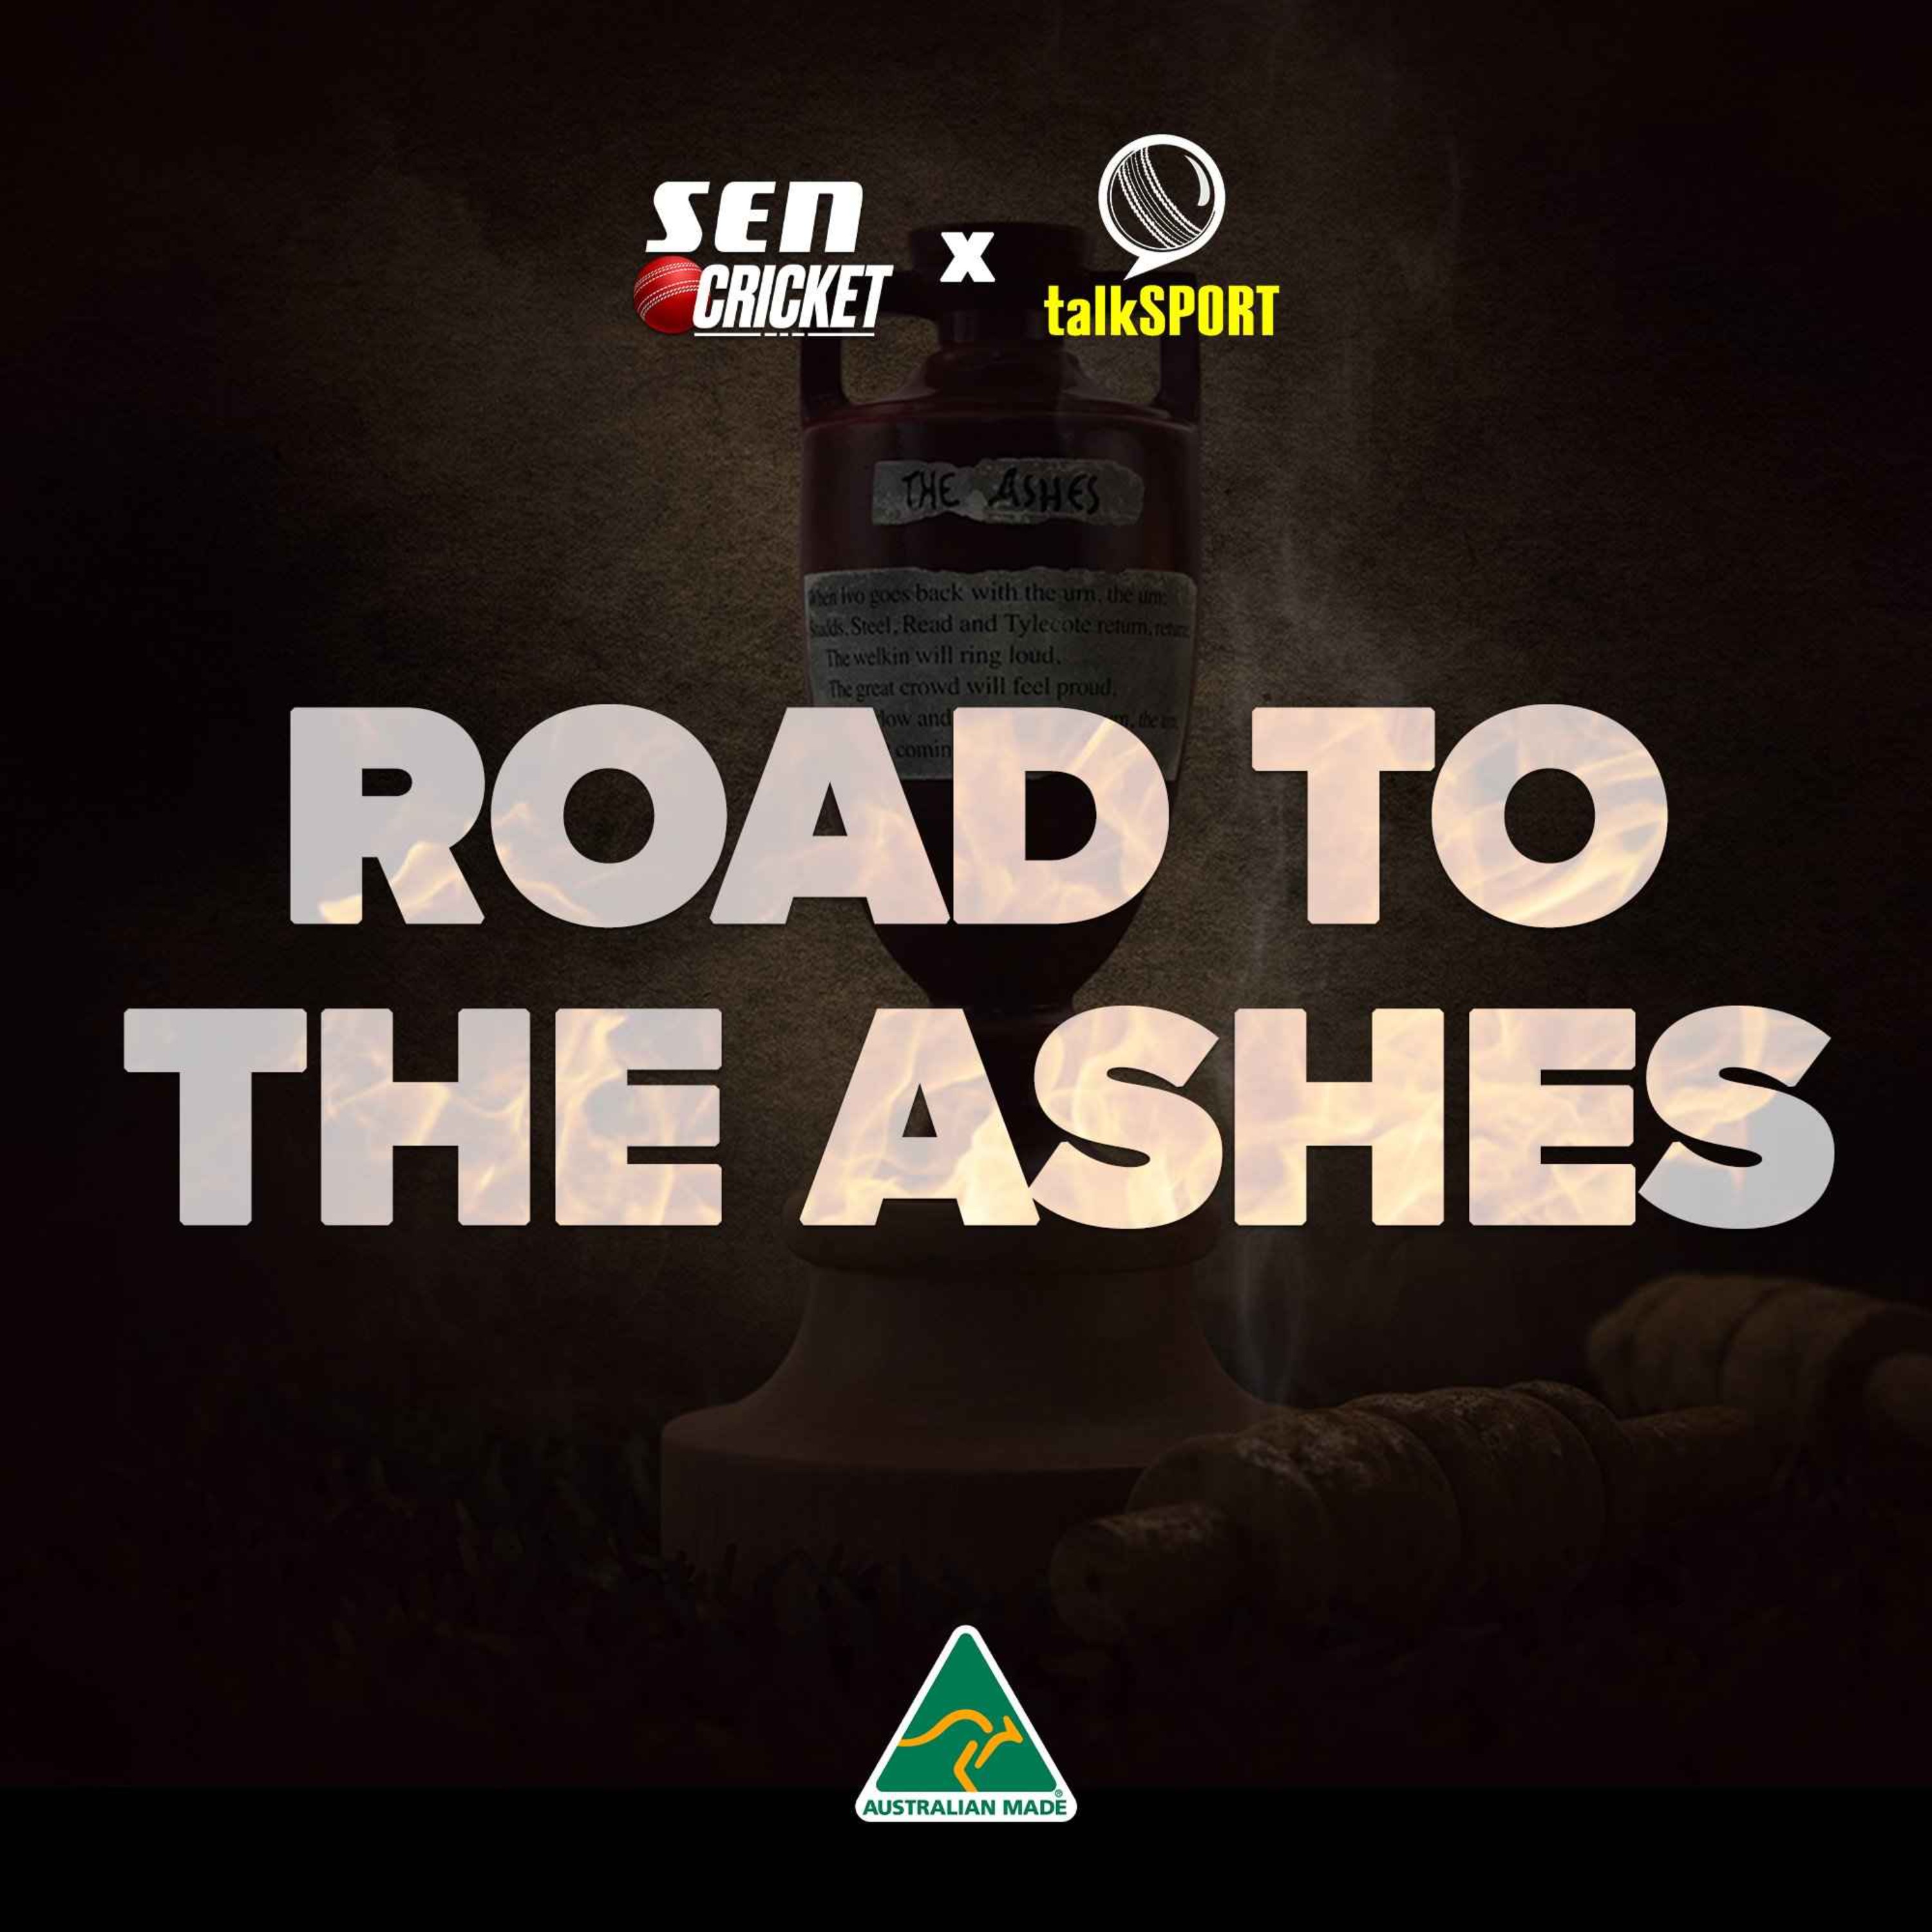 Road To The Ashes EP4: England's Injury Blow & Mike Gatting On Warne's Ashes